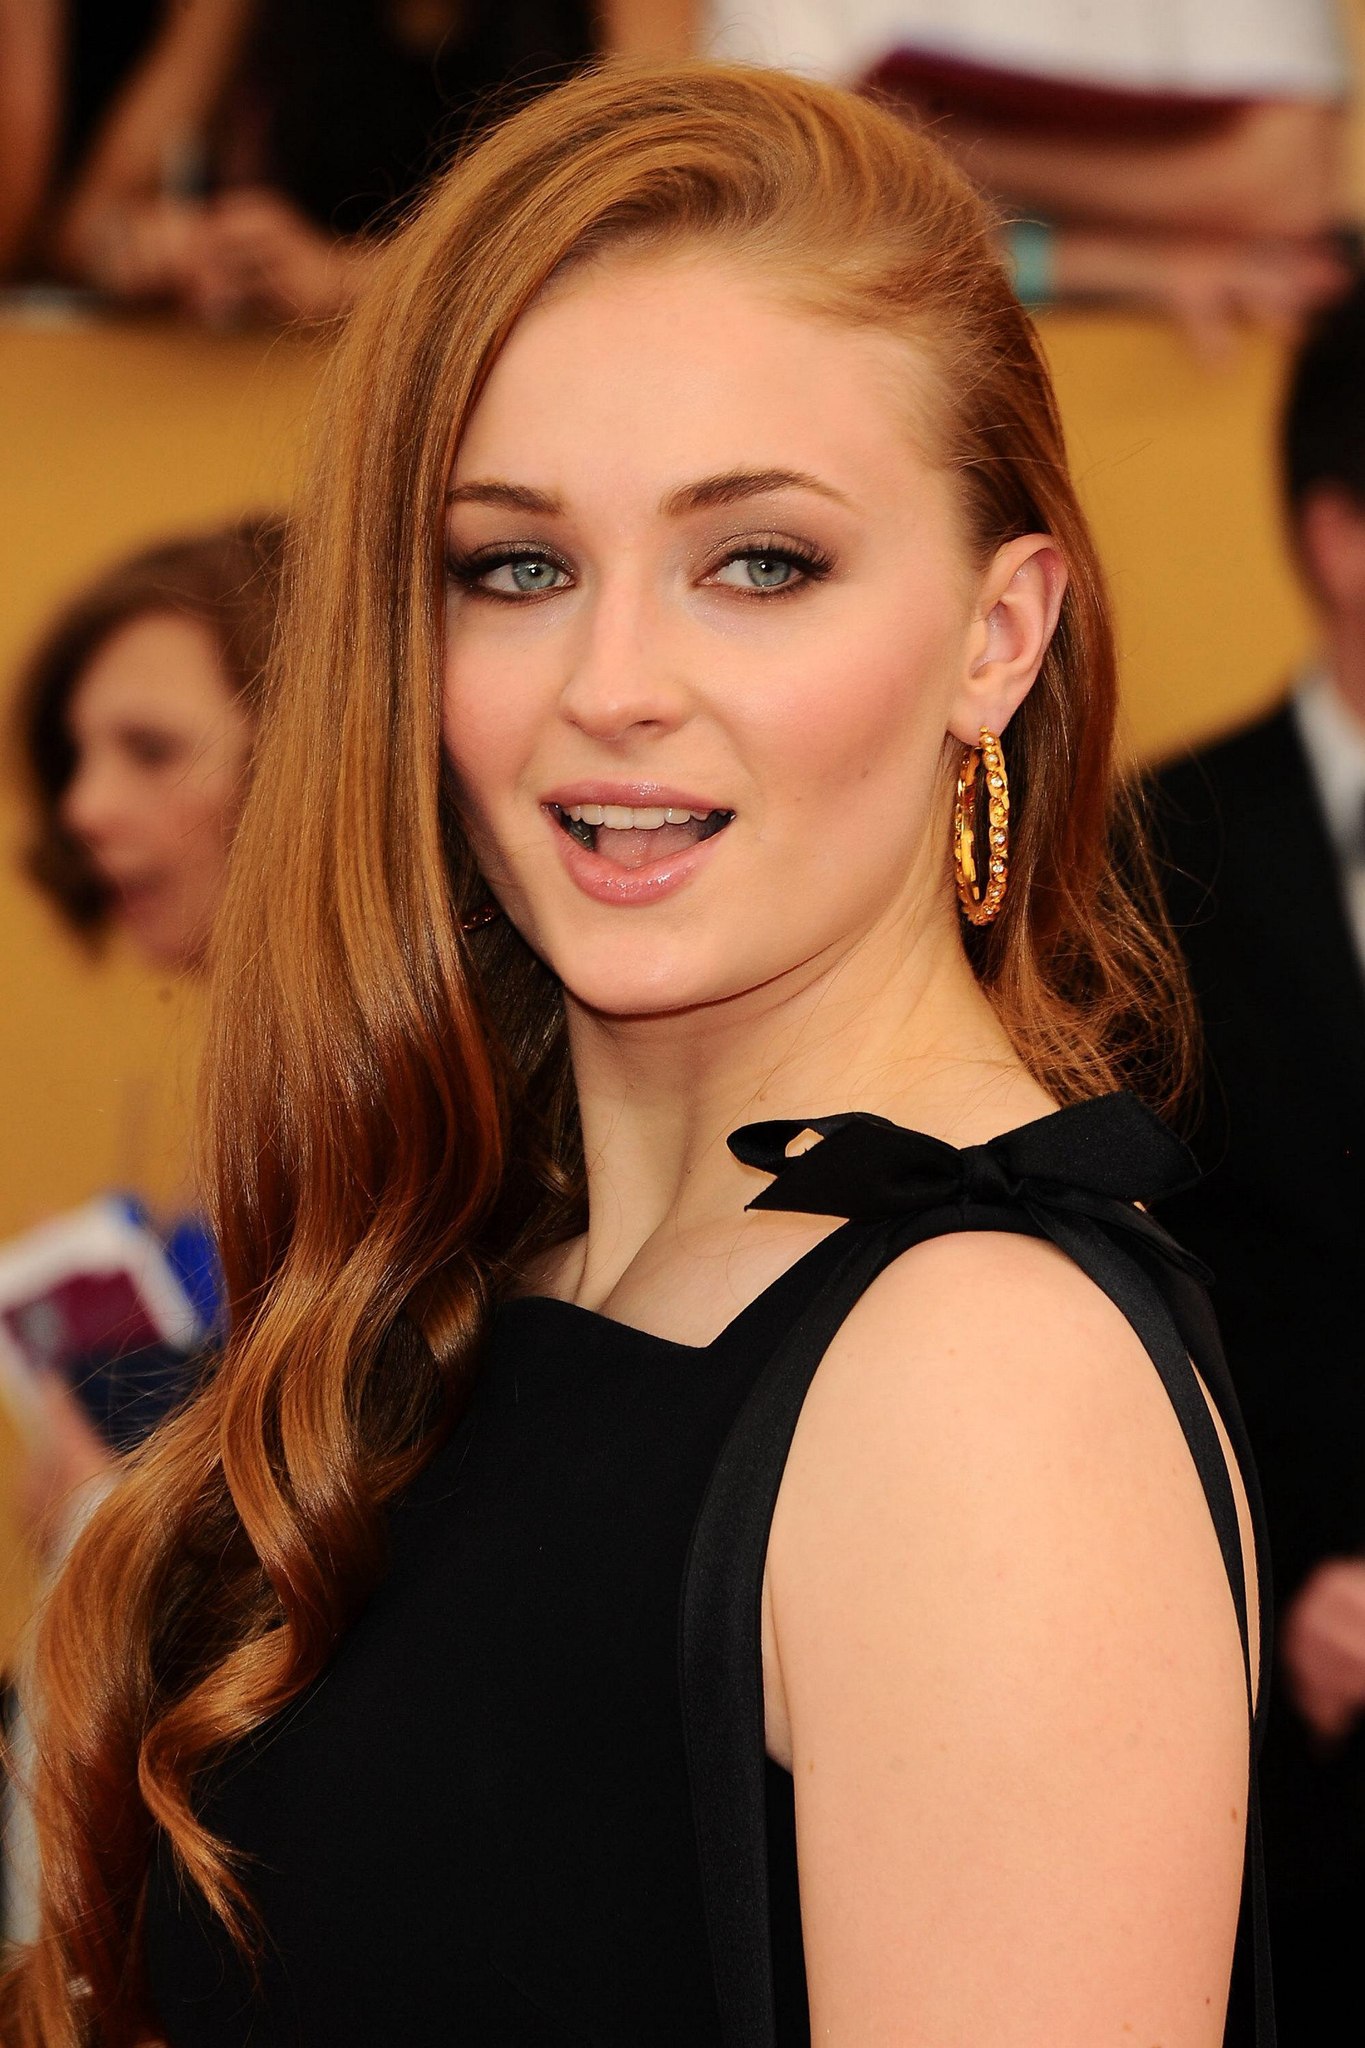 Sophie Turner (actress) photo 445 of 967 pics, wallpaper - photo #757030 - ThePlace2